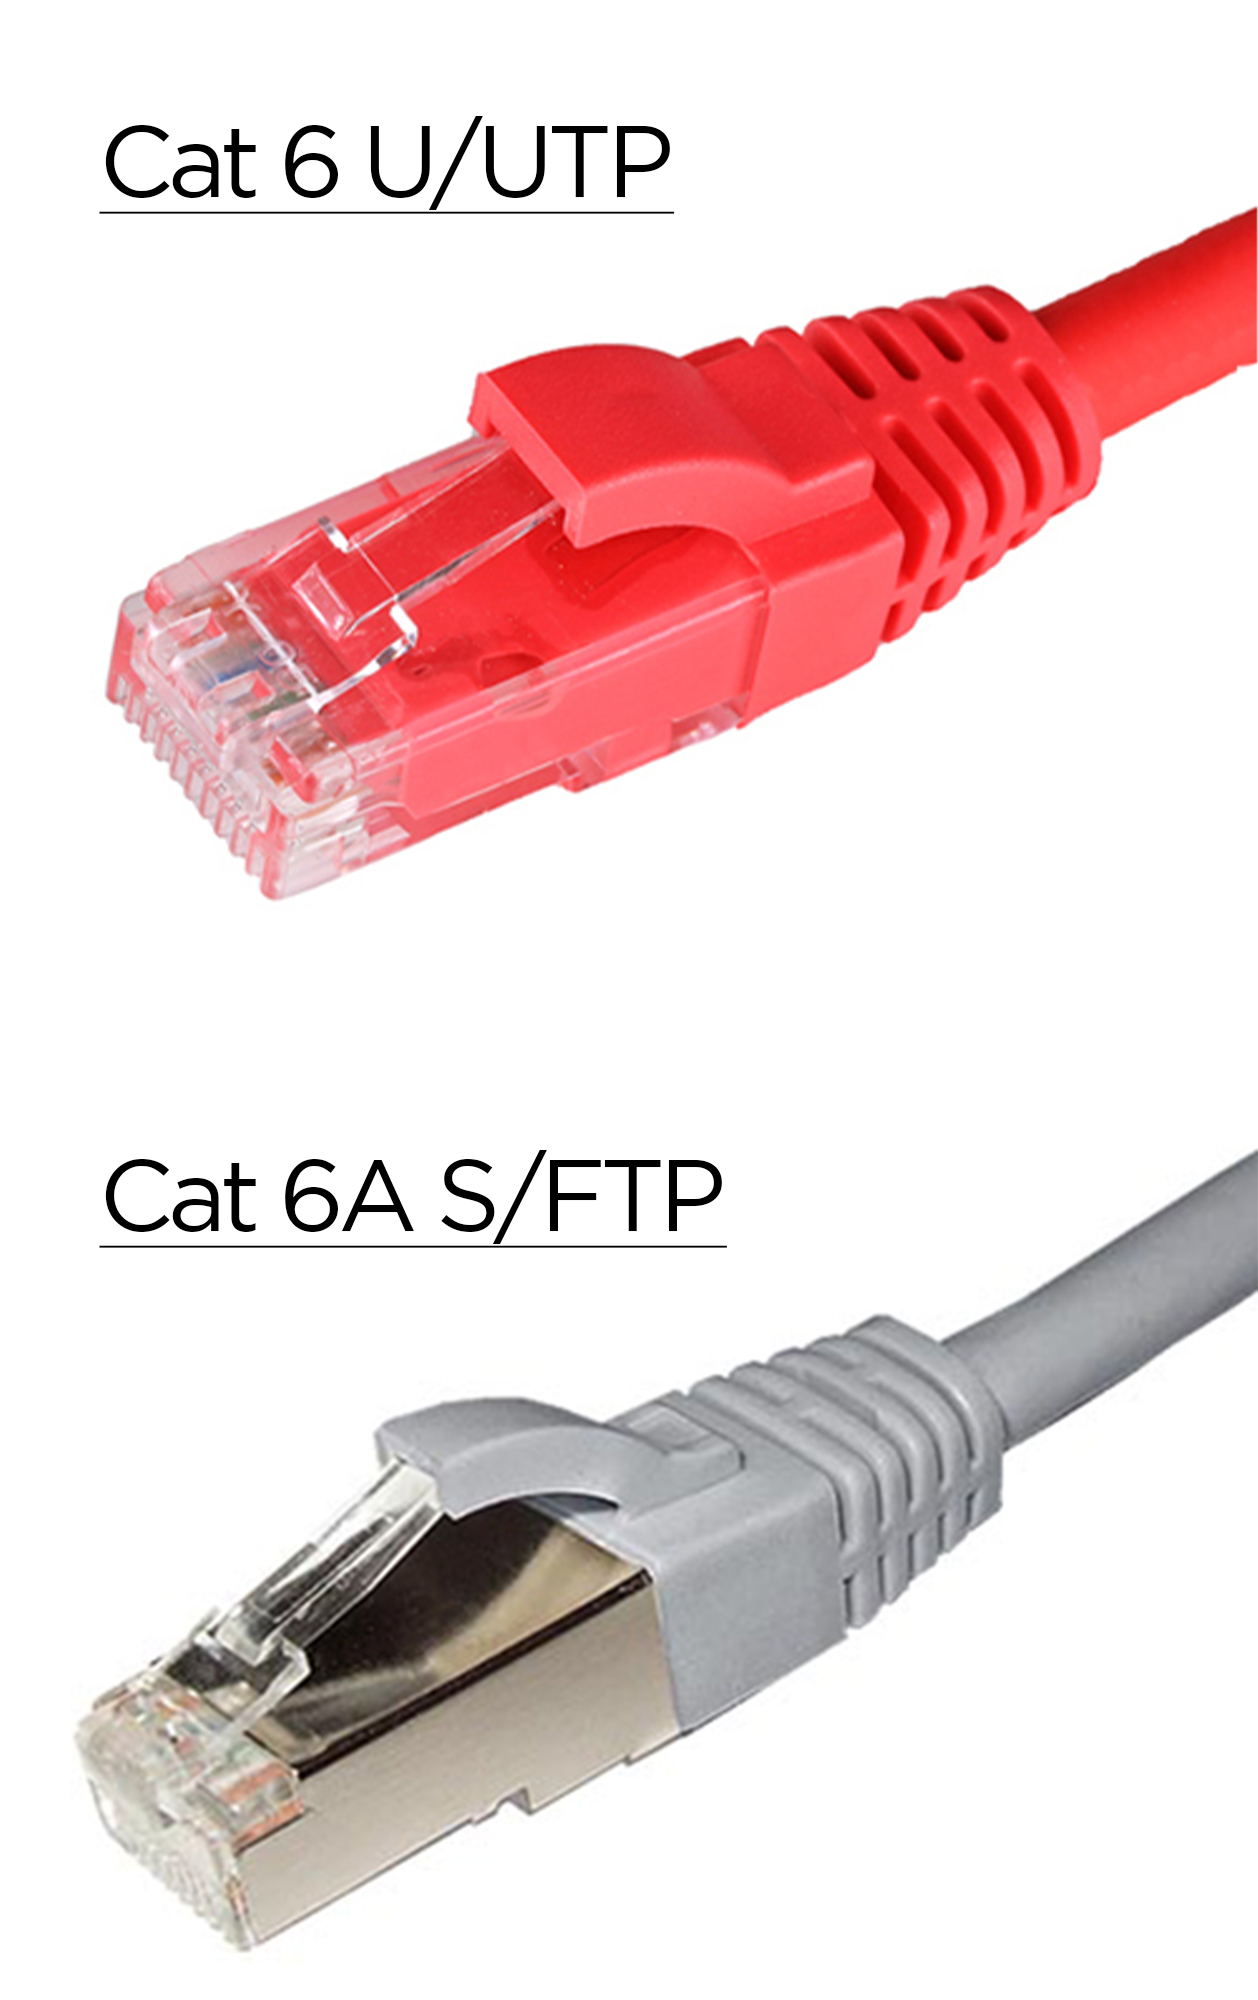 Cat 6 and Cat 6A Patch Lead Products